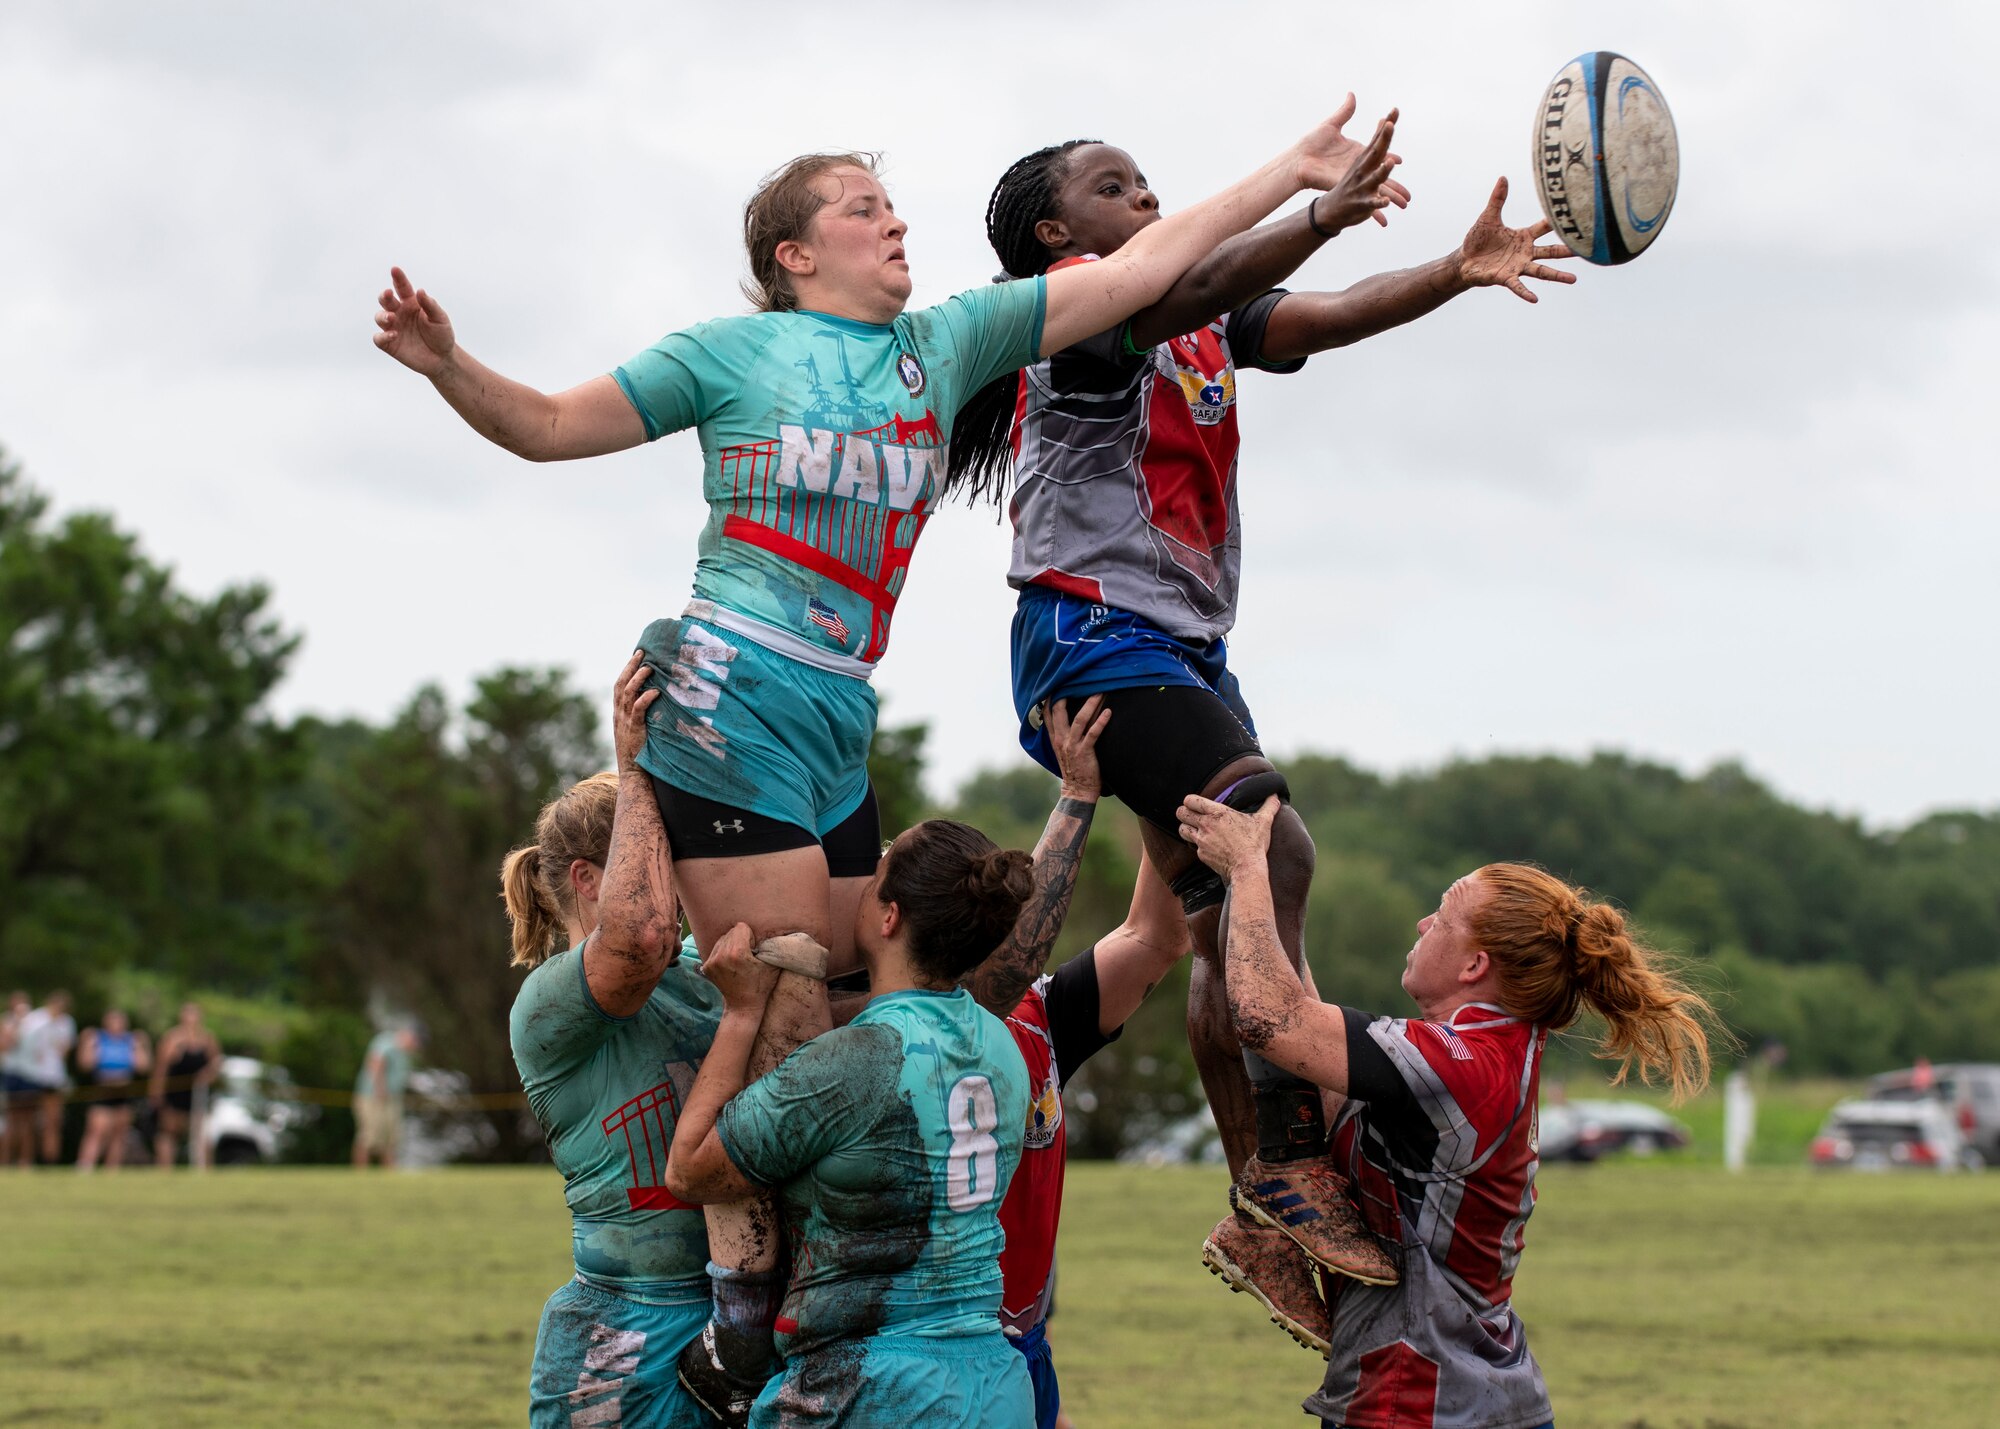 United States Air Force and Navy rugby players perform a line out at the Annual Armed Forces Women’s Rugby Championship in Wilmington, North Carolina, June 26, 2021.